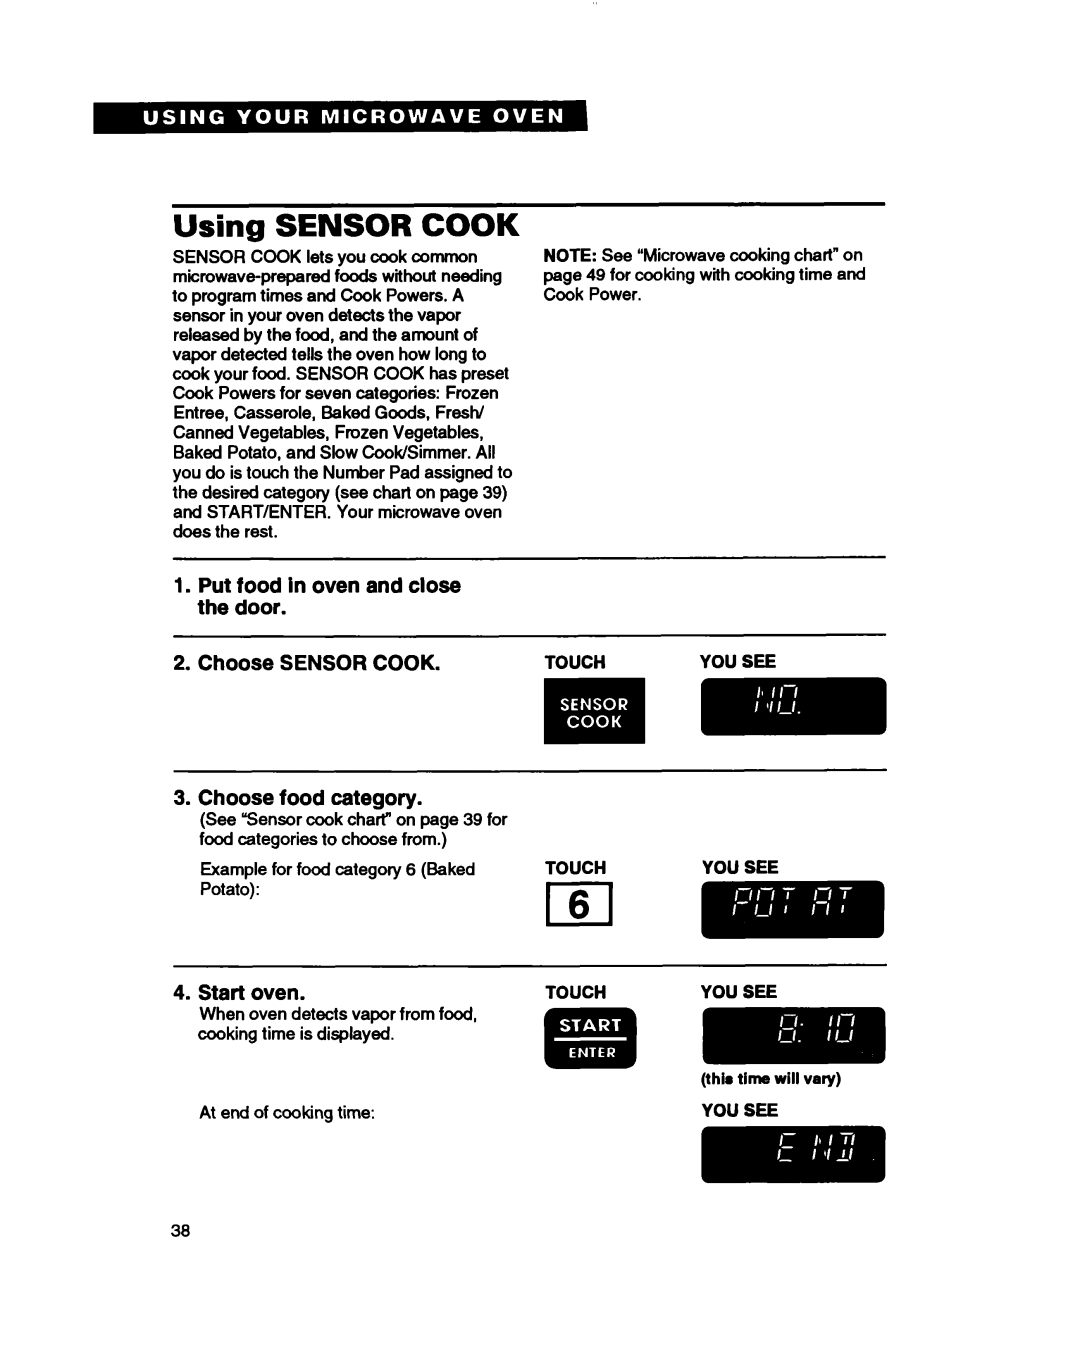 Whirlpool MH7115XB Using SENSOR COOK, Choose SENSOR COOK 3.Choose food category, Put food in oven and close the door 